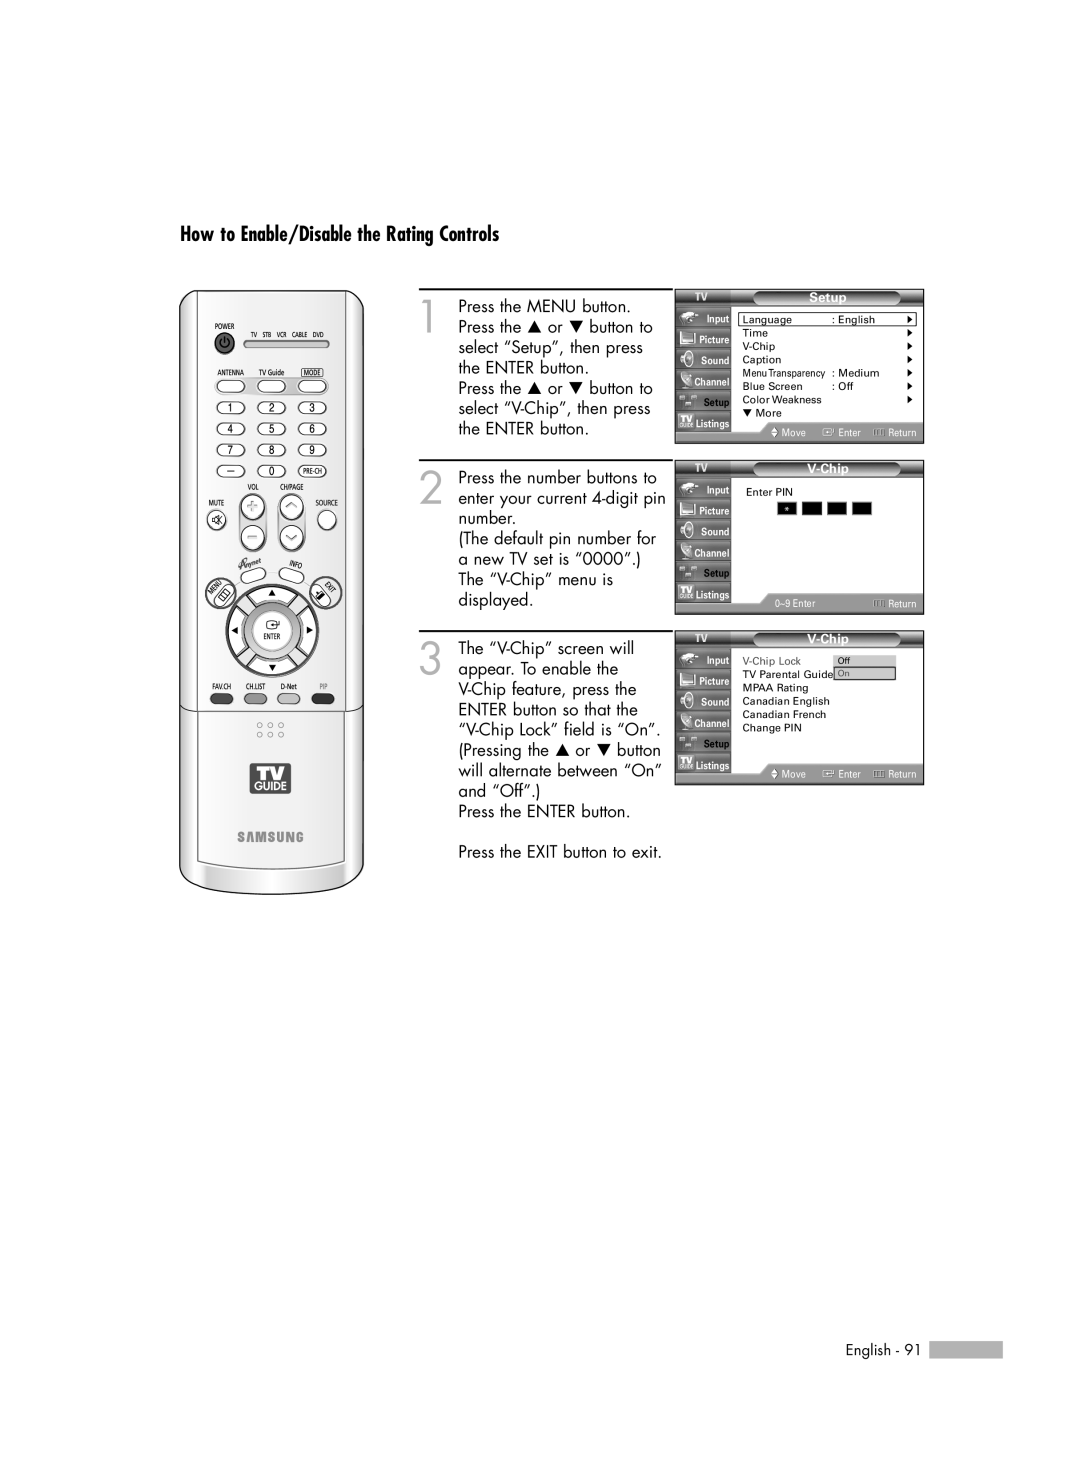 Samsung HL-R5688W manual How to Enable/Disable the Rating Controls, V-Chip Lock 